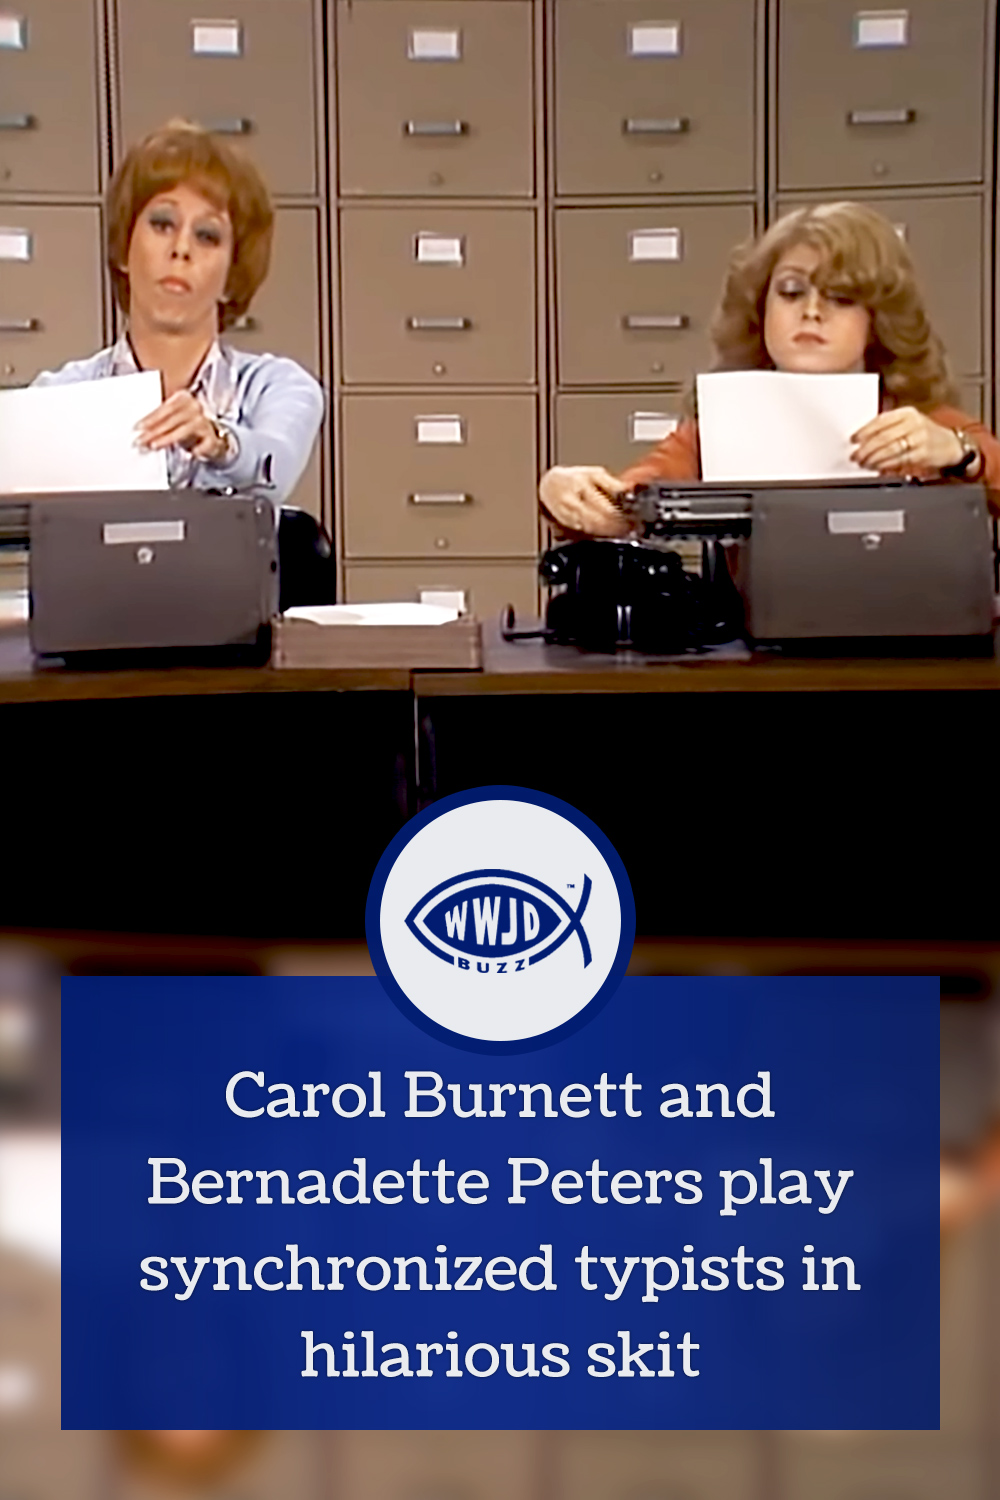 Carol Burnett and Bernadette Peters play synchronized typists in hilarious skit